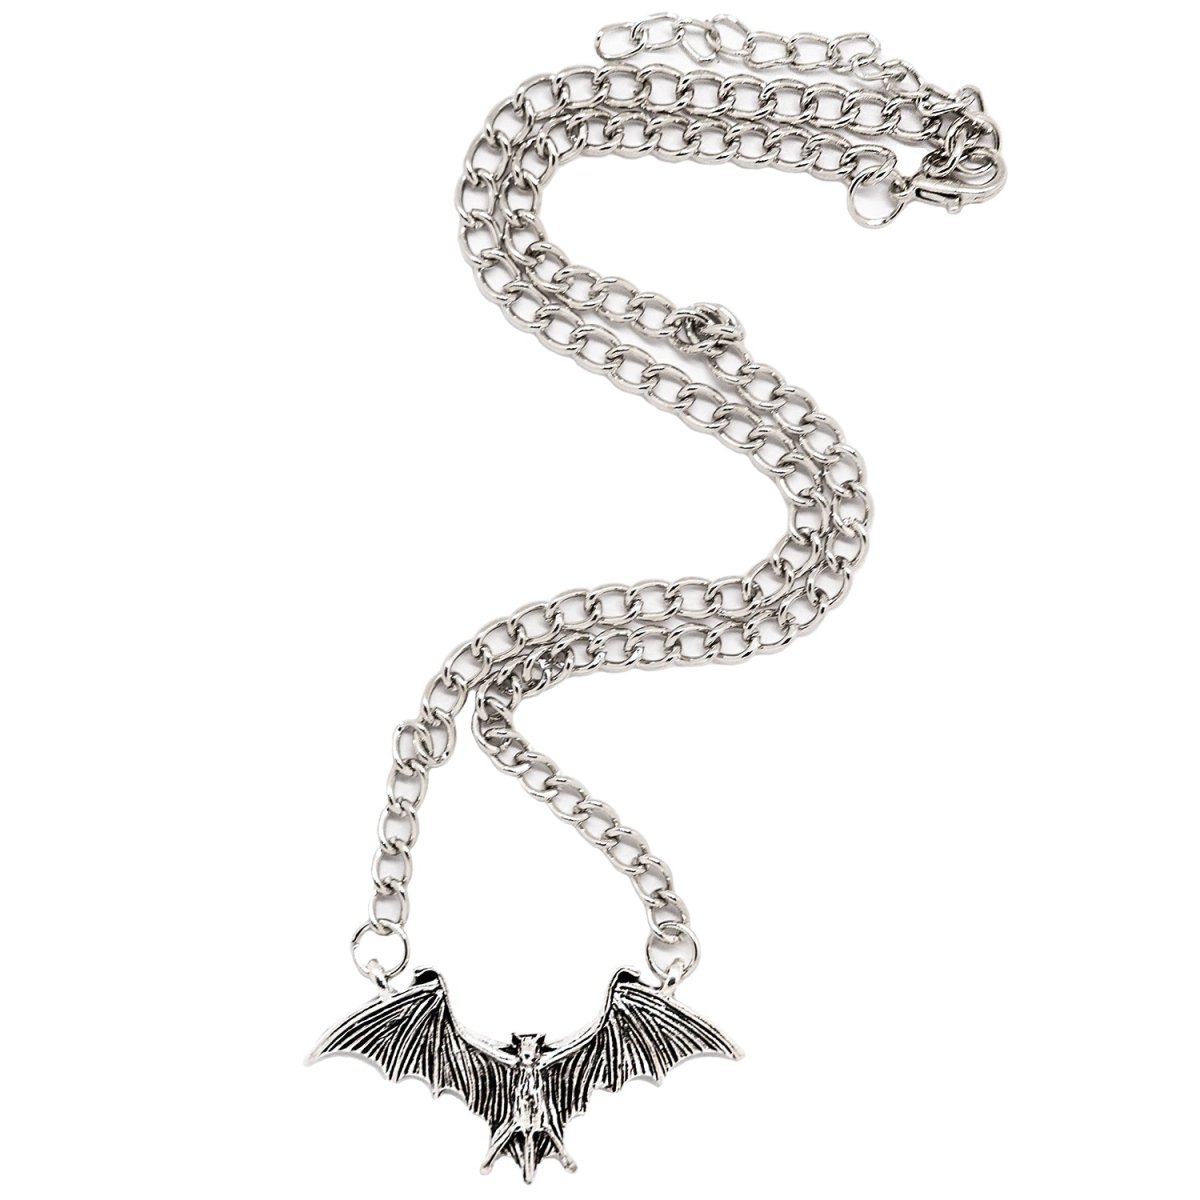 Too Fast | Switchblade Stiletto | Bat Necklace